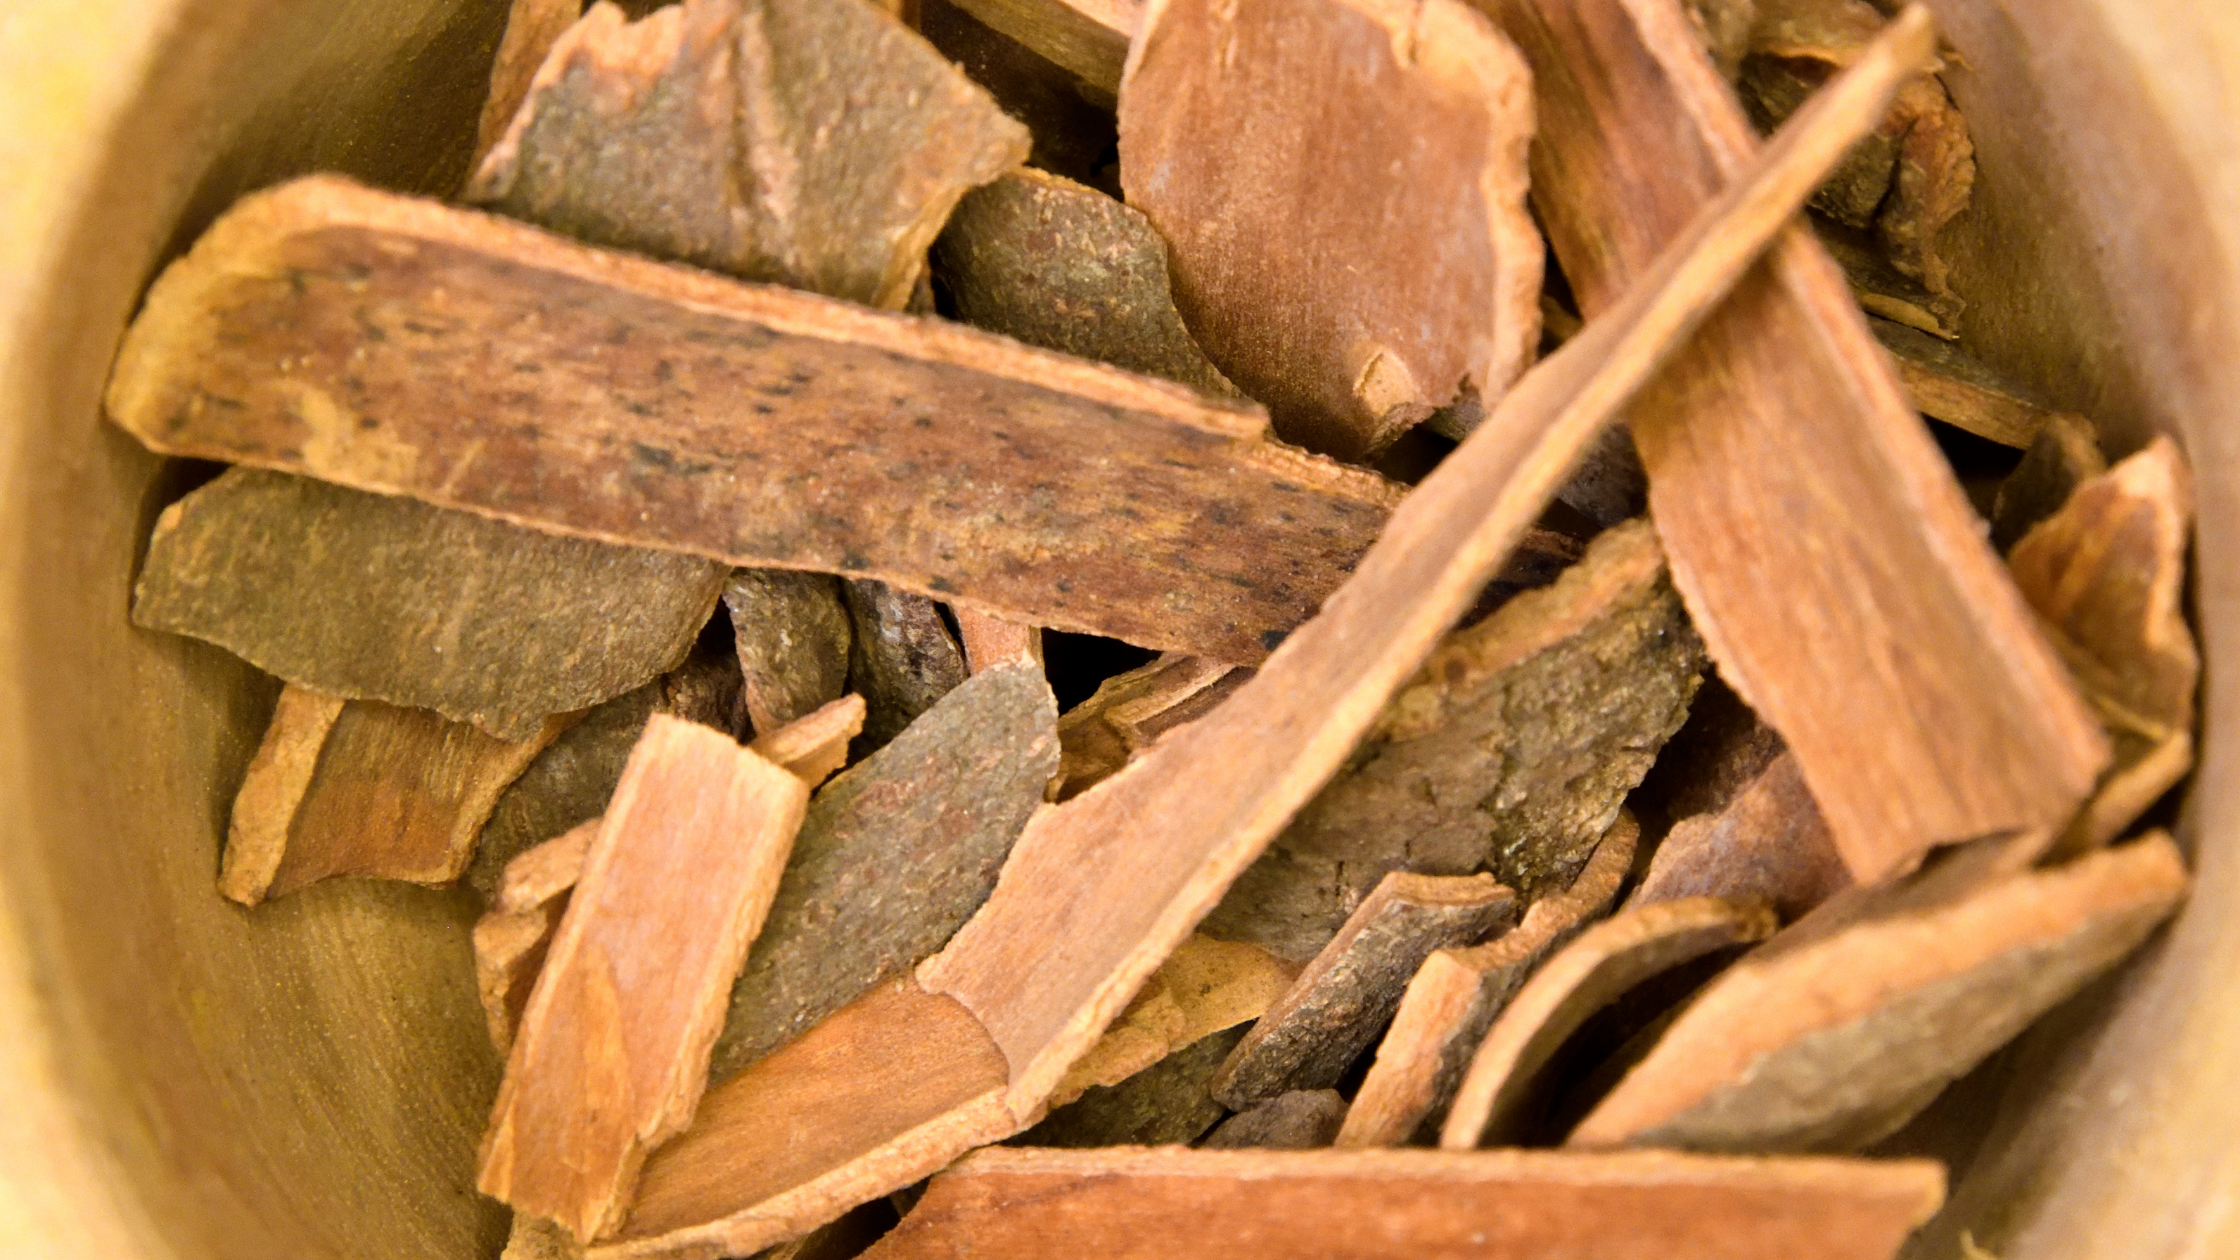 tcm herb cinnamon bark piled in a wooden bowl